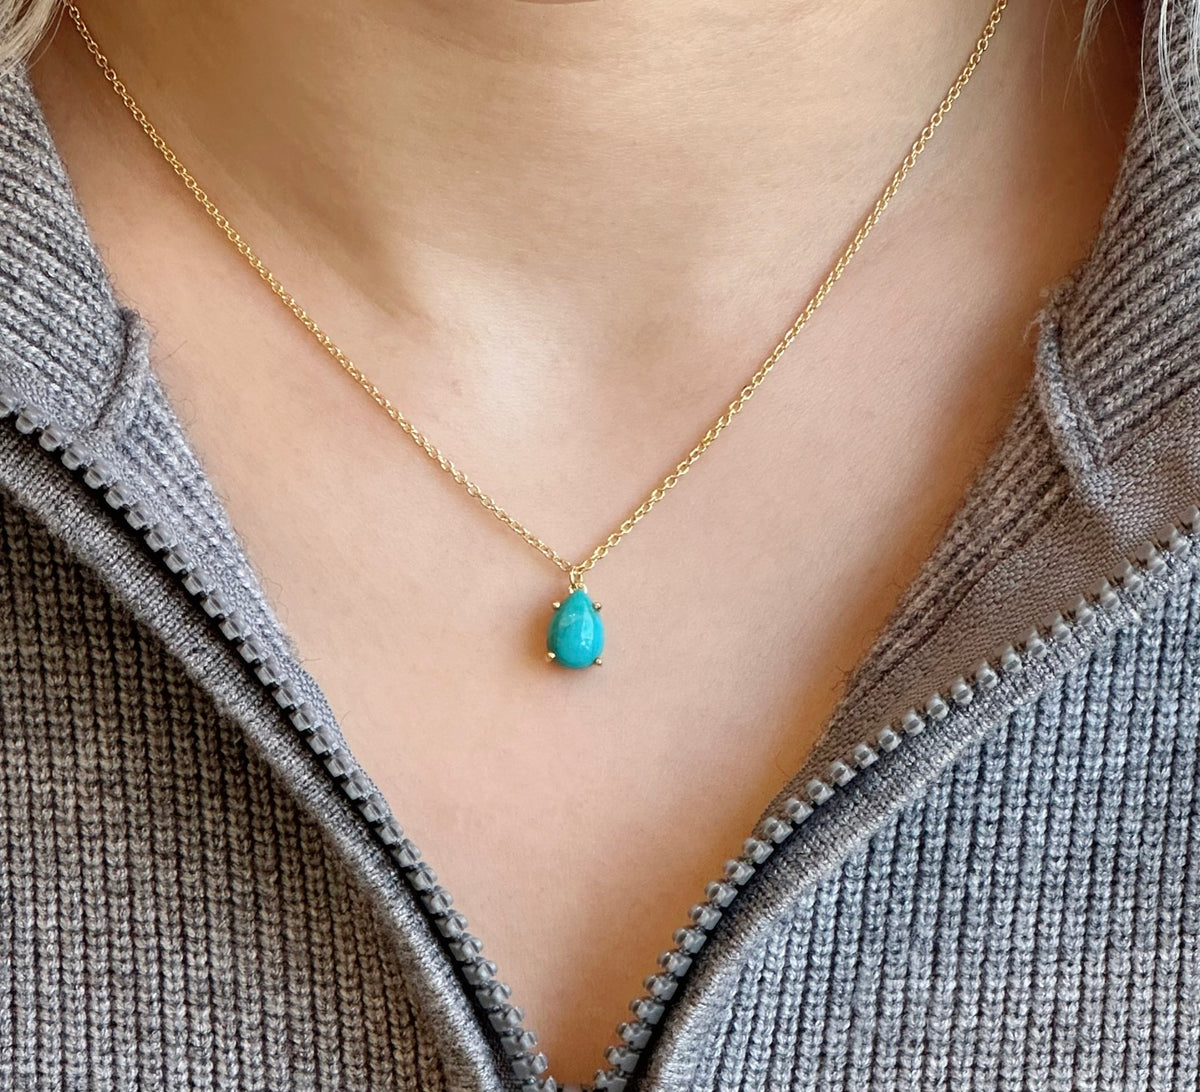 Amare Wear Celebration Collection - December Birthstone Necklace Turquoise